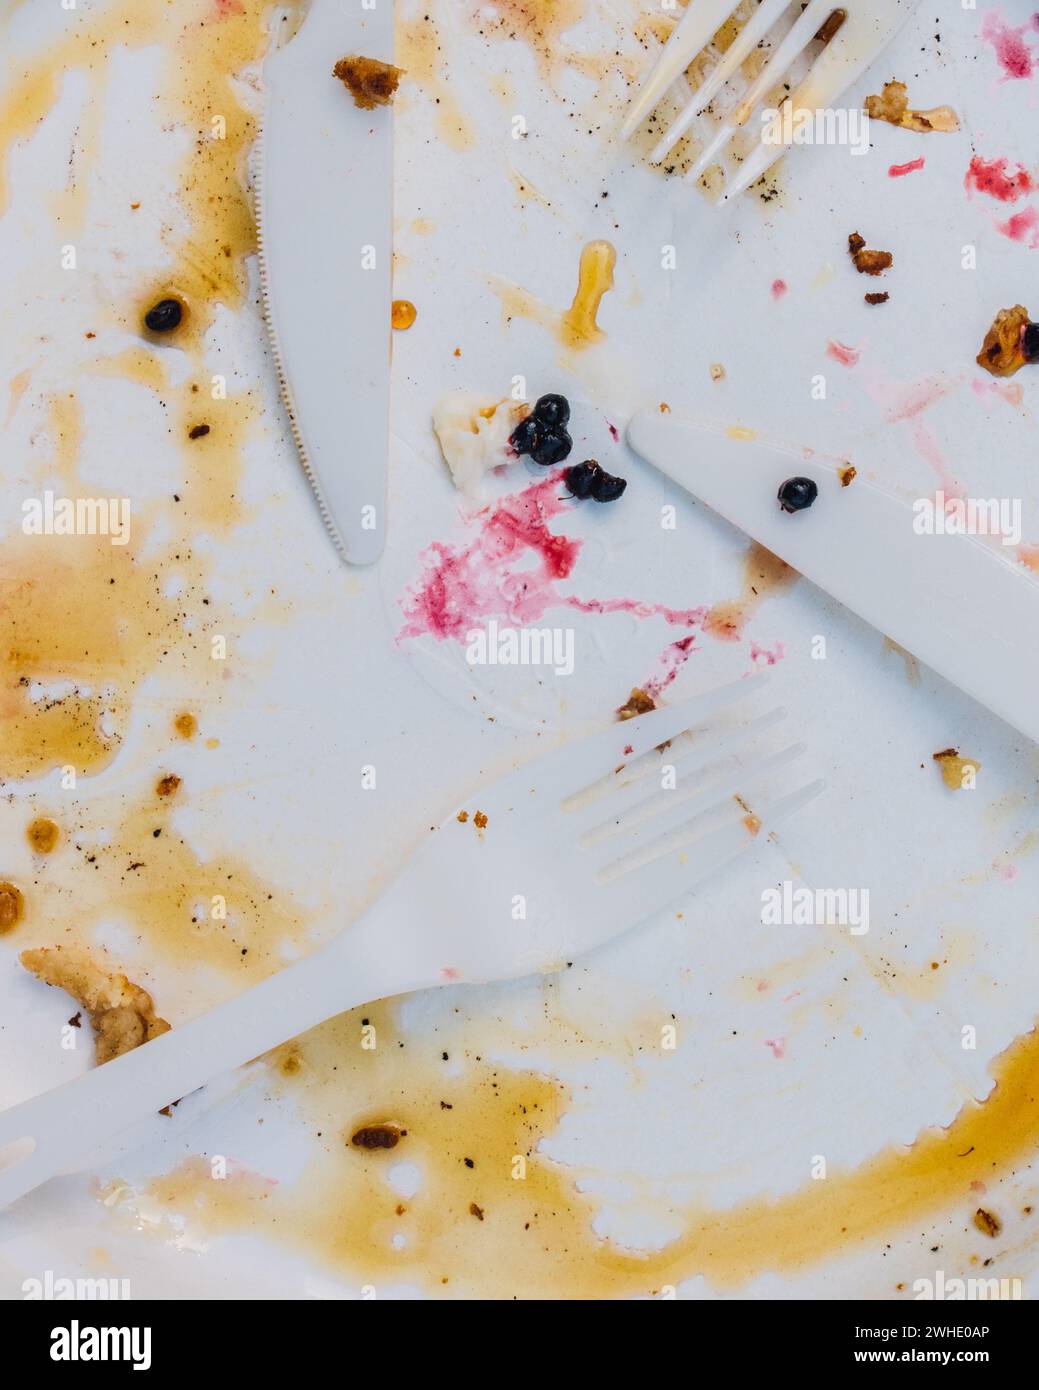 close up of dirty pancake plate with syrup and berries, forks, knives Stock Photo